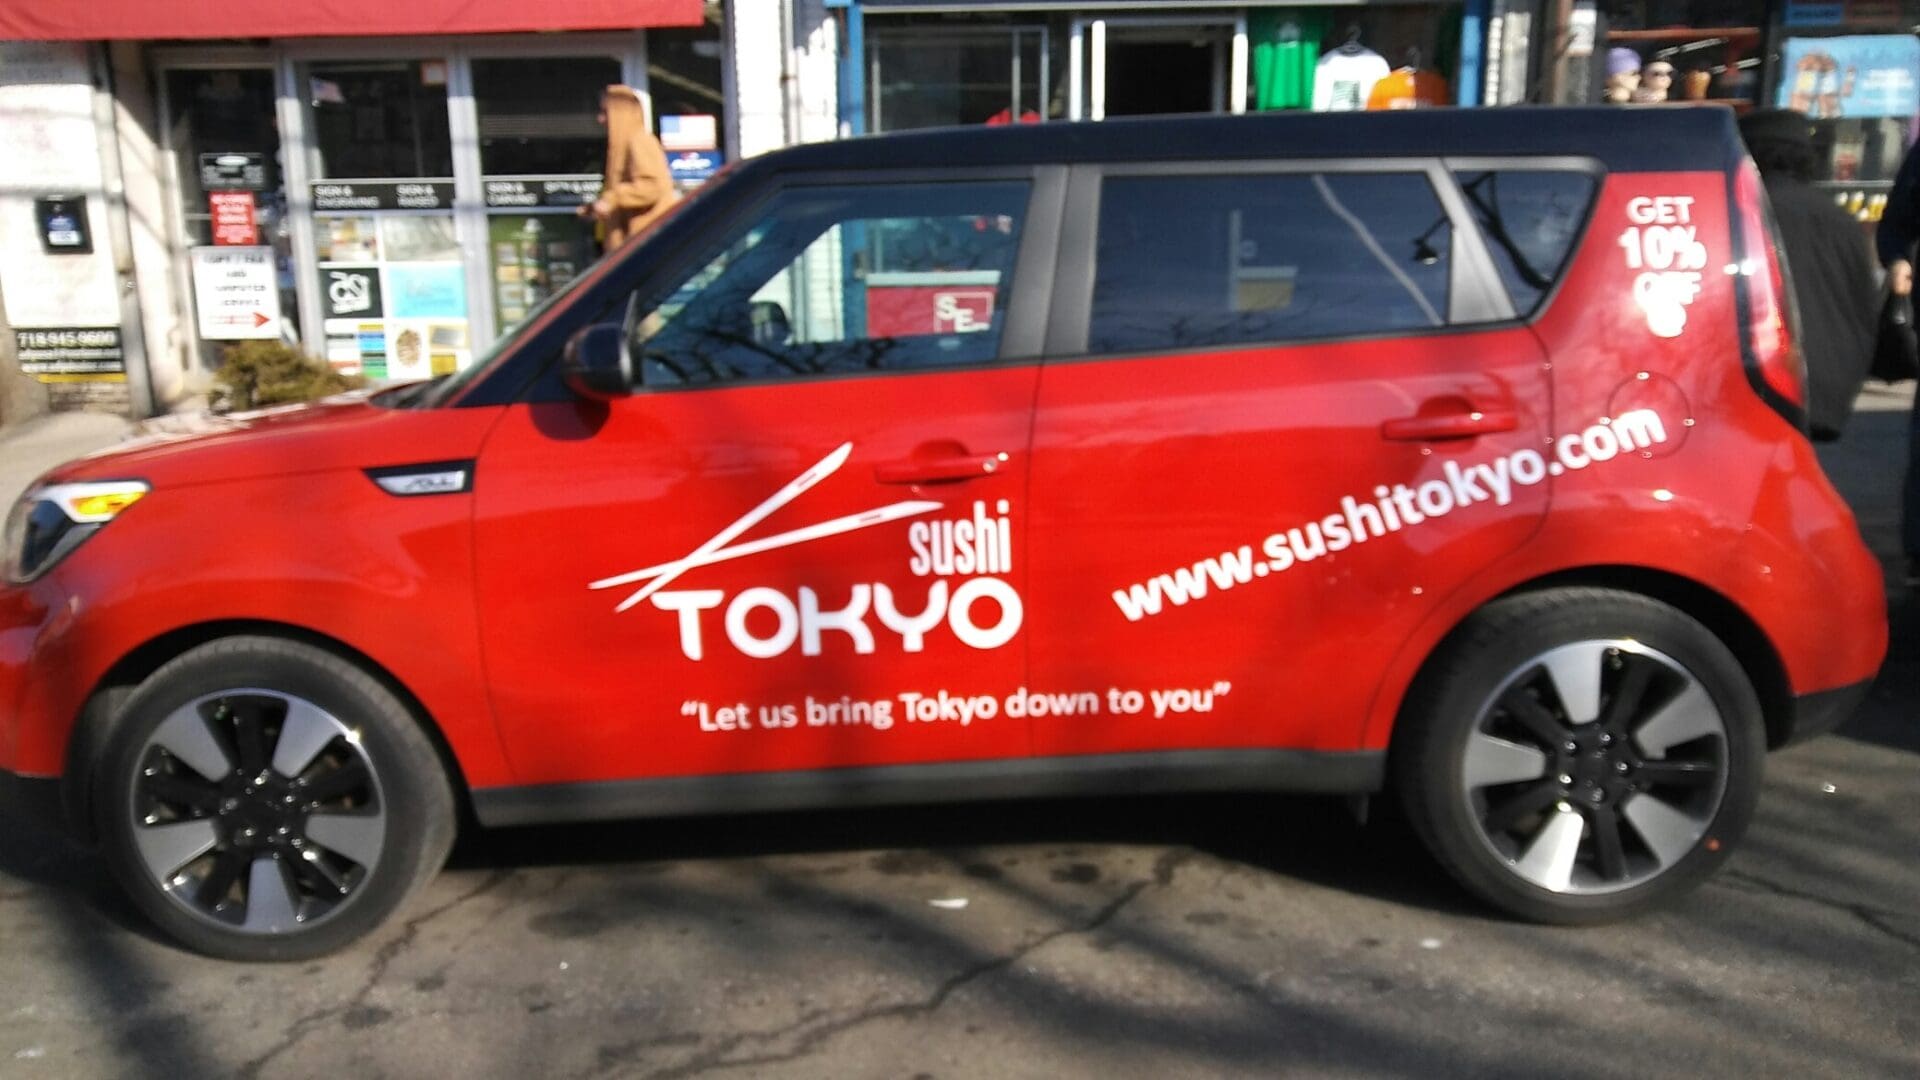 A red car with sushi tokyo written on it.